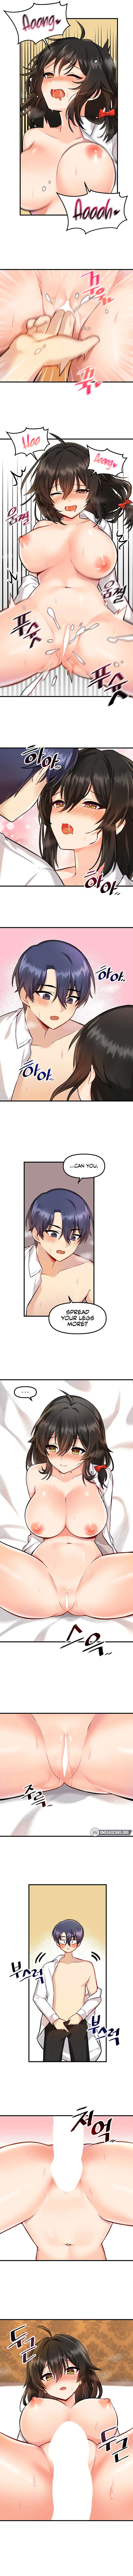 trapped-in-the-academys-eroge-chap-4-4